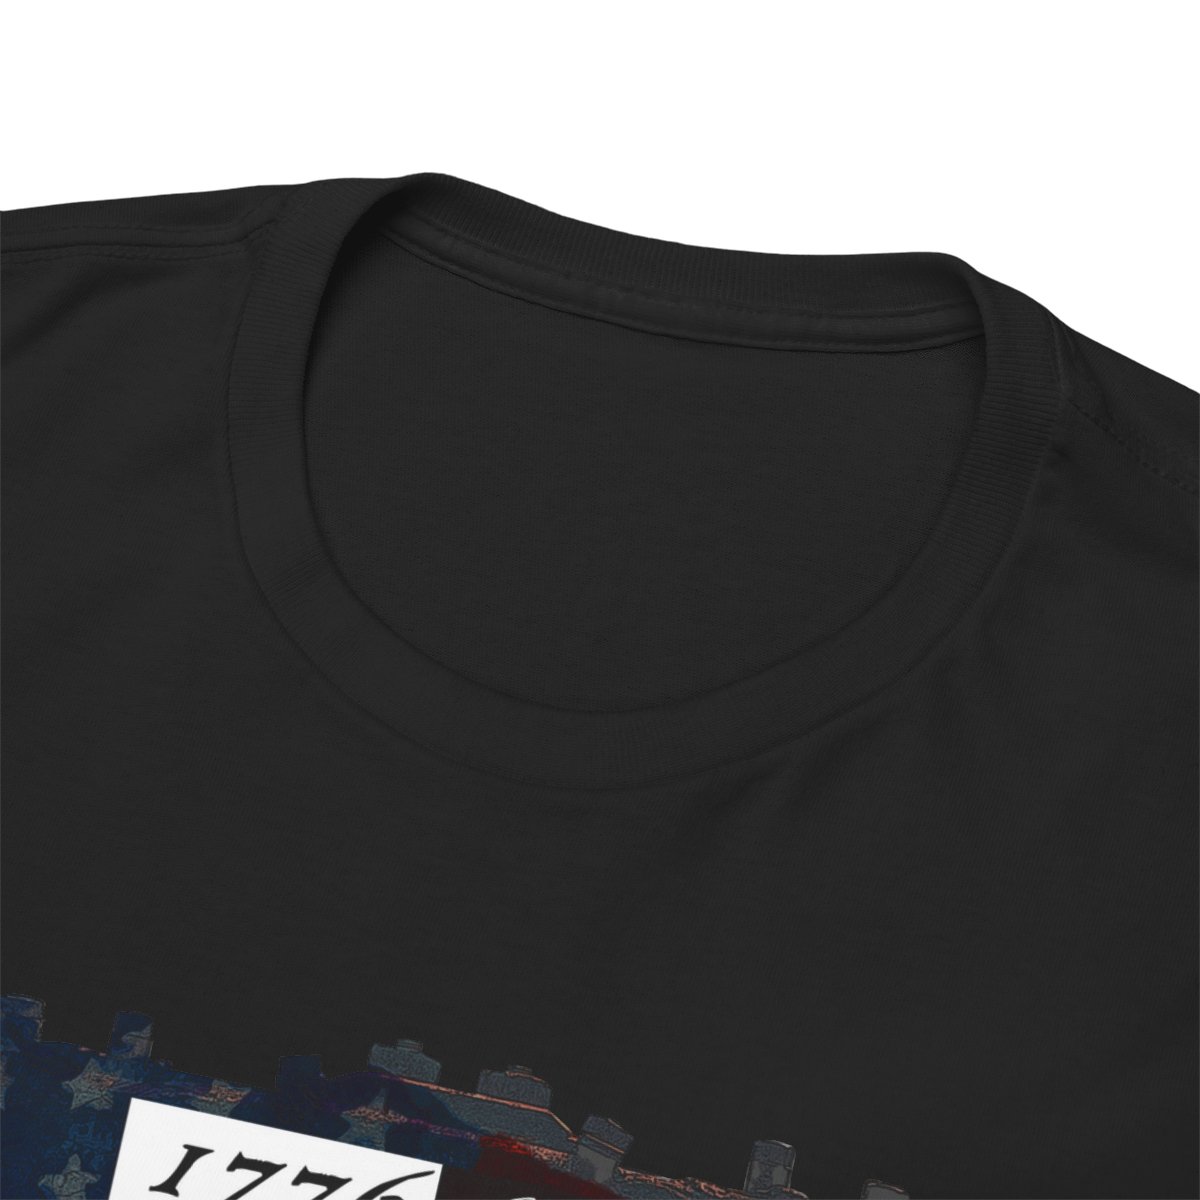 1776 EVENT - WE THE PEOPLE - SECOND AMENDMENT product thumbnail image